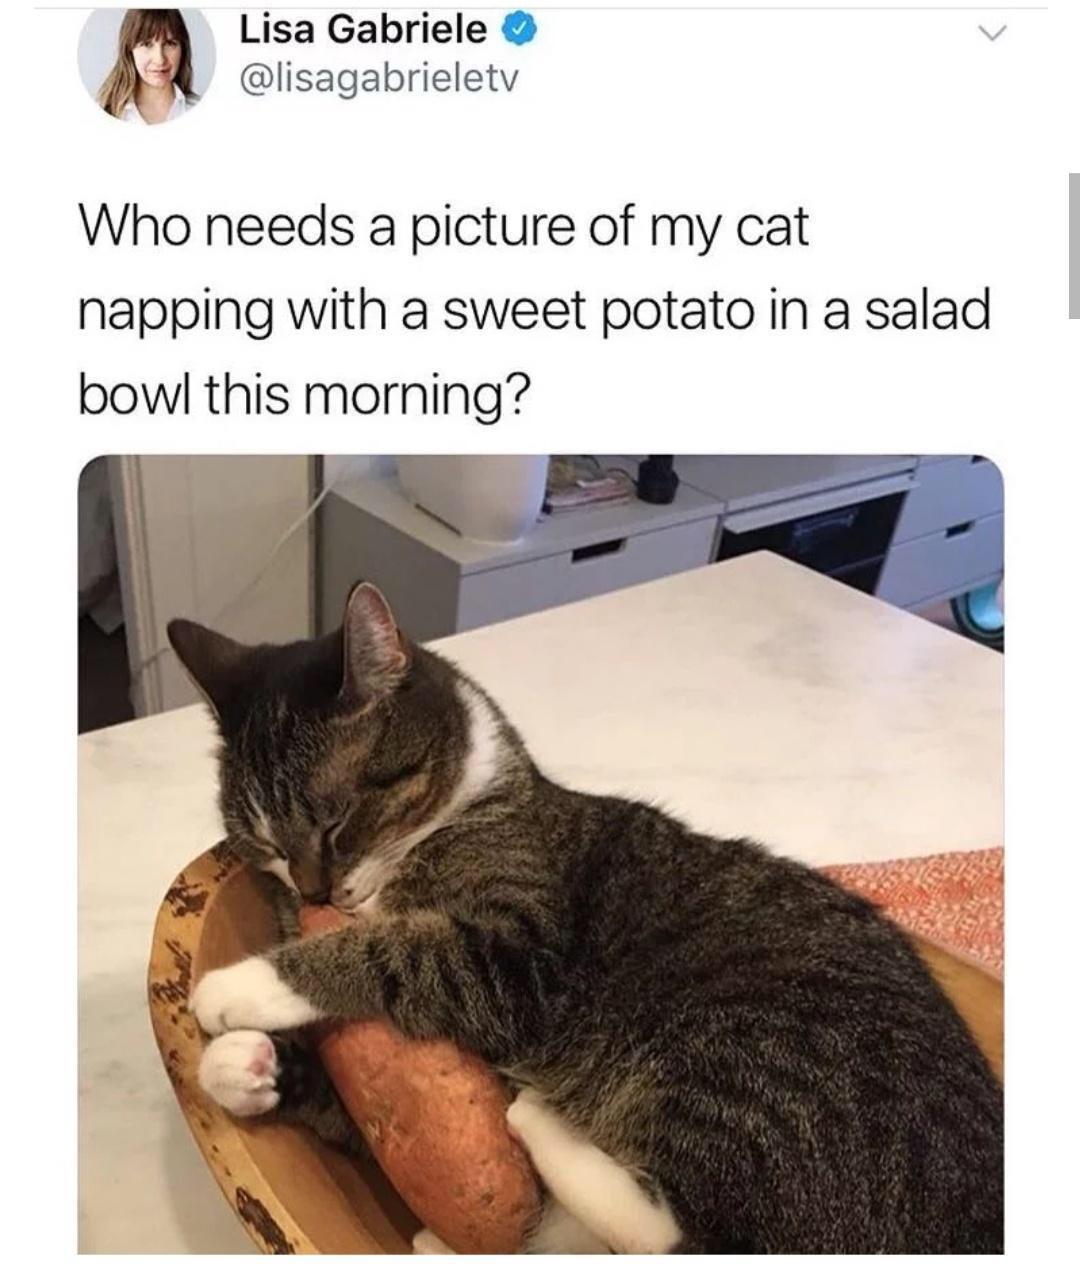 monday morning randomness - cat with sweet potato - Lisa Gabriele Who needs a picture of my cat napping with a sweet potato in a salad bowl this morning?